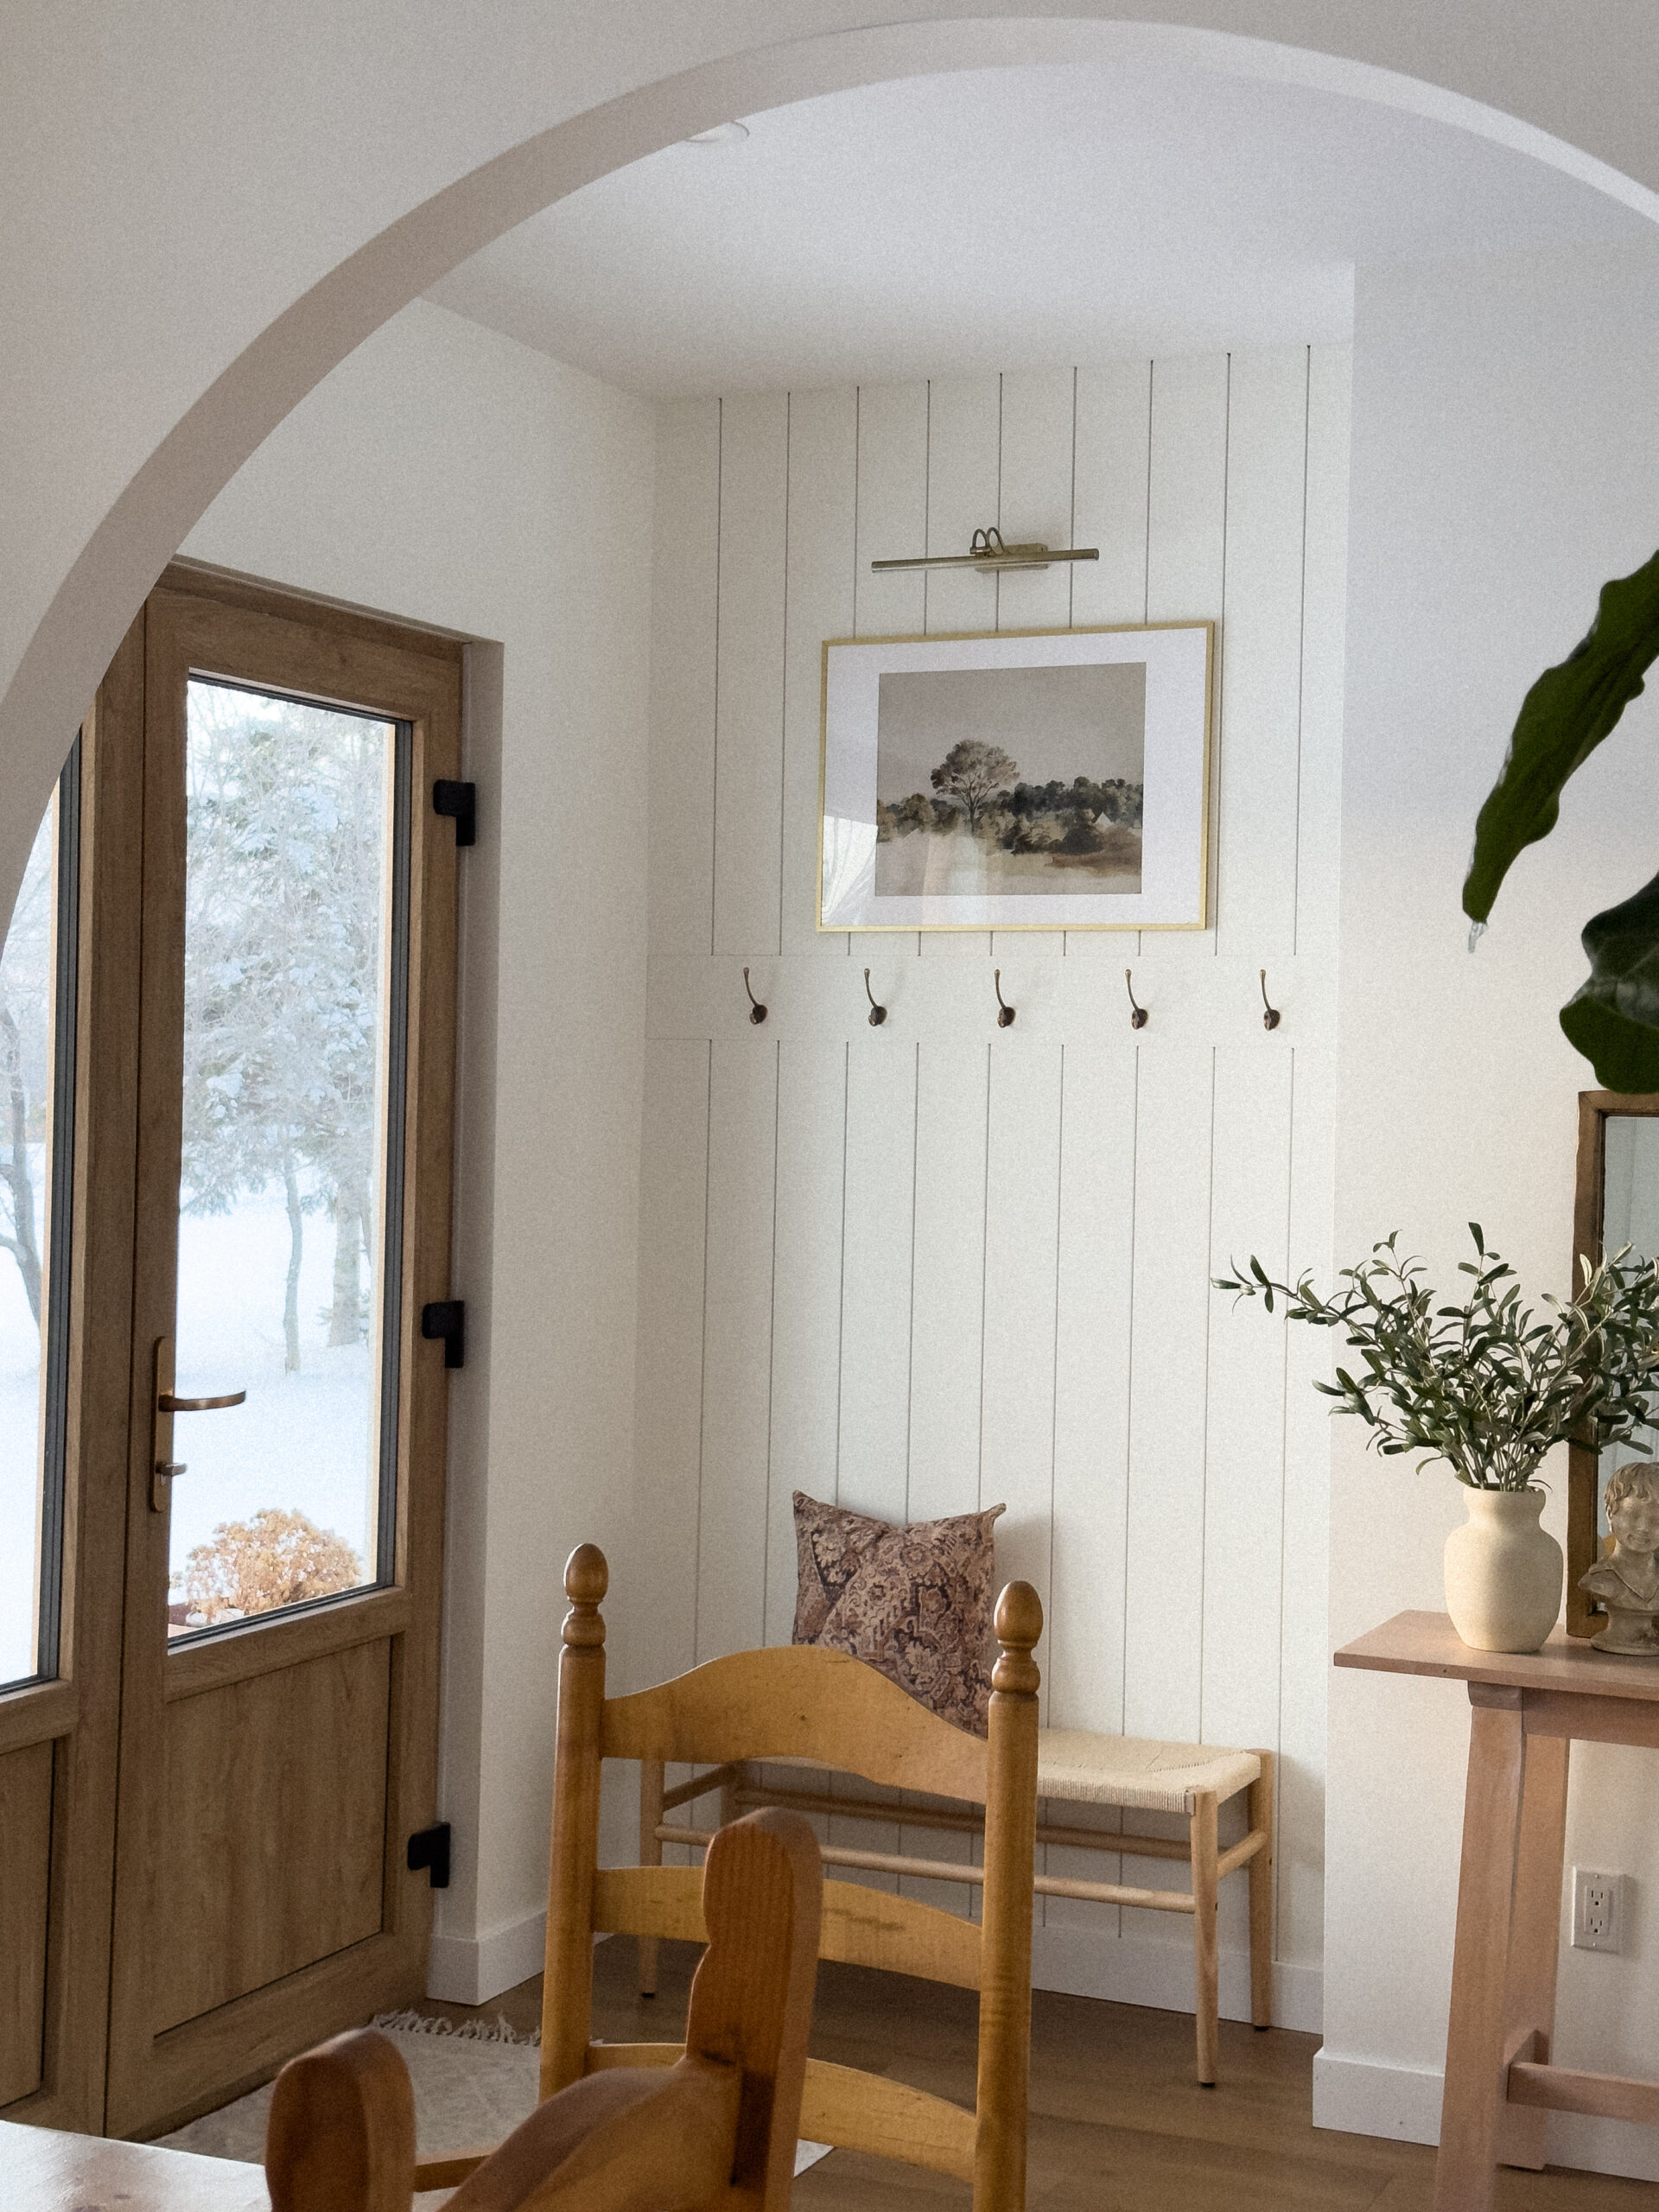 Transitional entrance nook with arched doorway